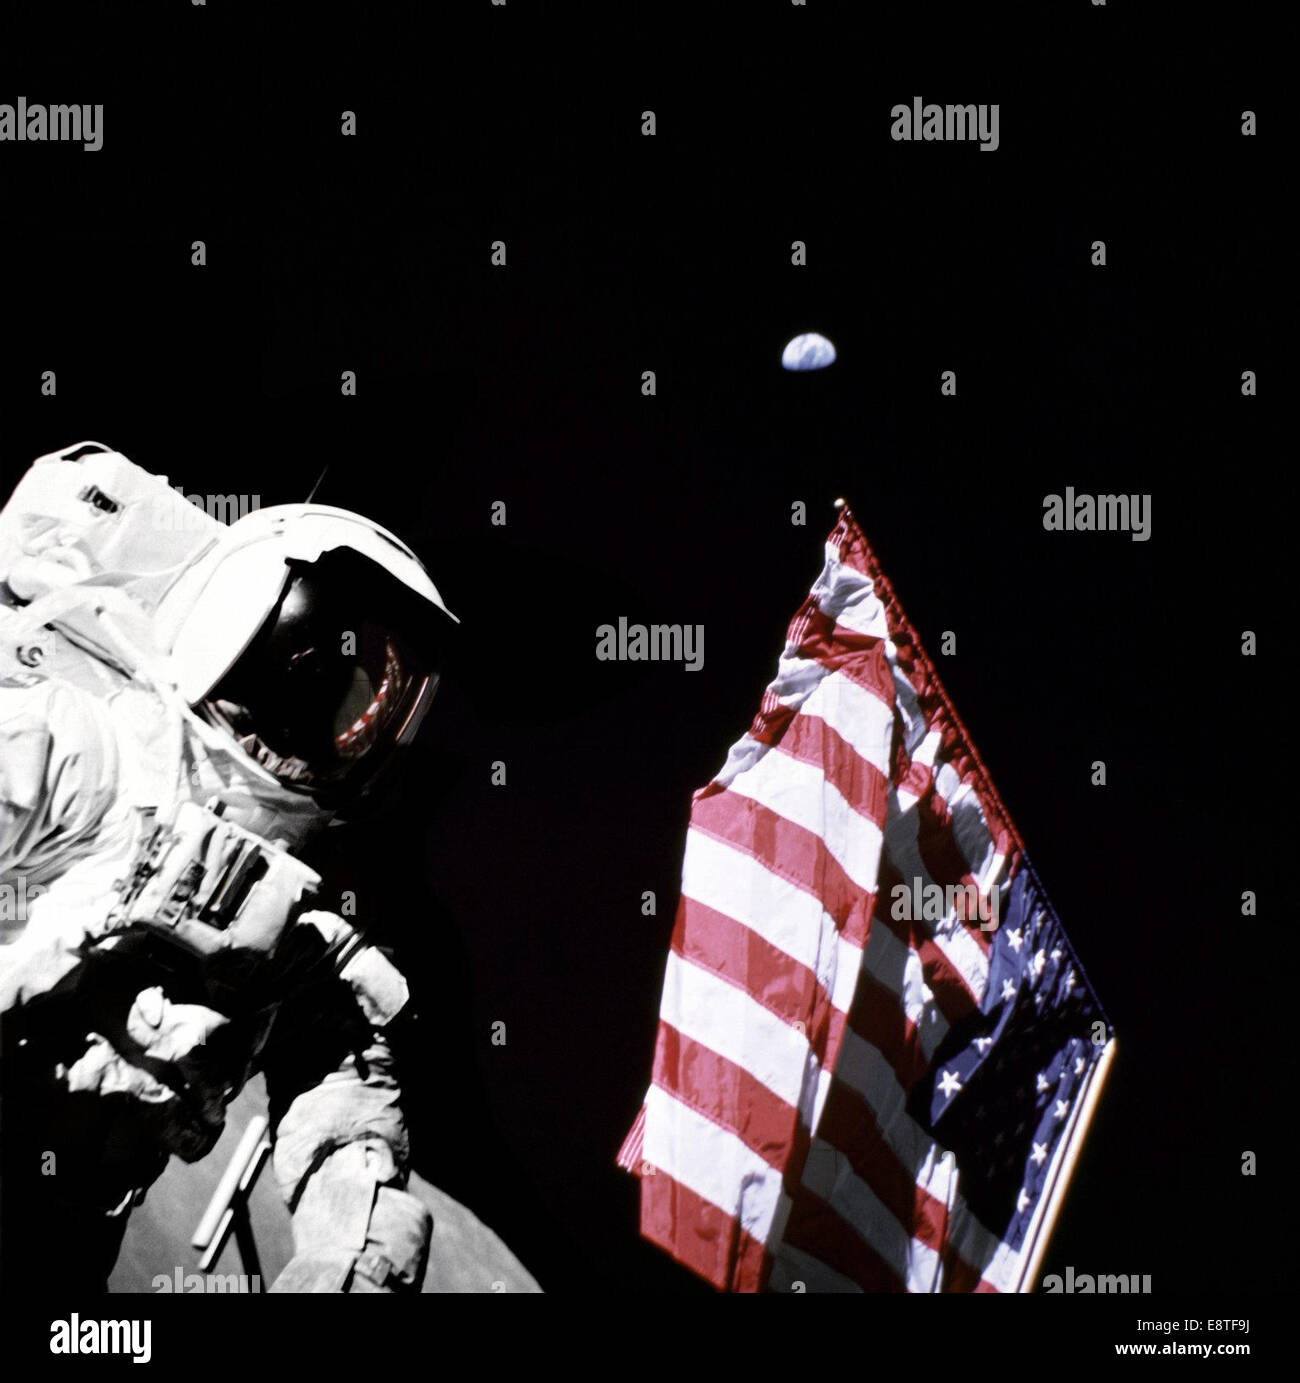 Geologist-Astronaut Harrison Schmitt, Apollo 17 Lunar Module pilot, is photographed next to the American Flag during extravehicular activity (EVA) of NASA's final lunar landing mission in the Apollo series. The photo was taken at the Taurus-Littrow landin Stock Photo